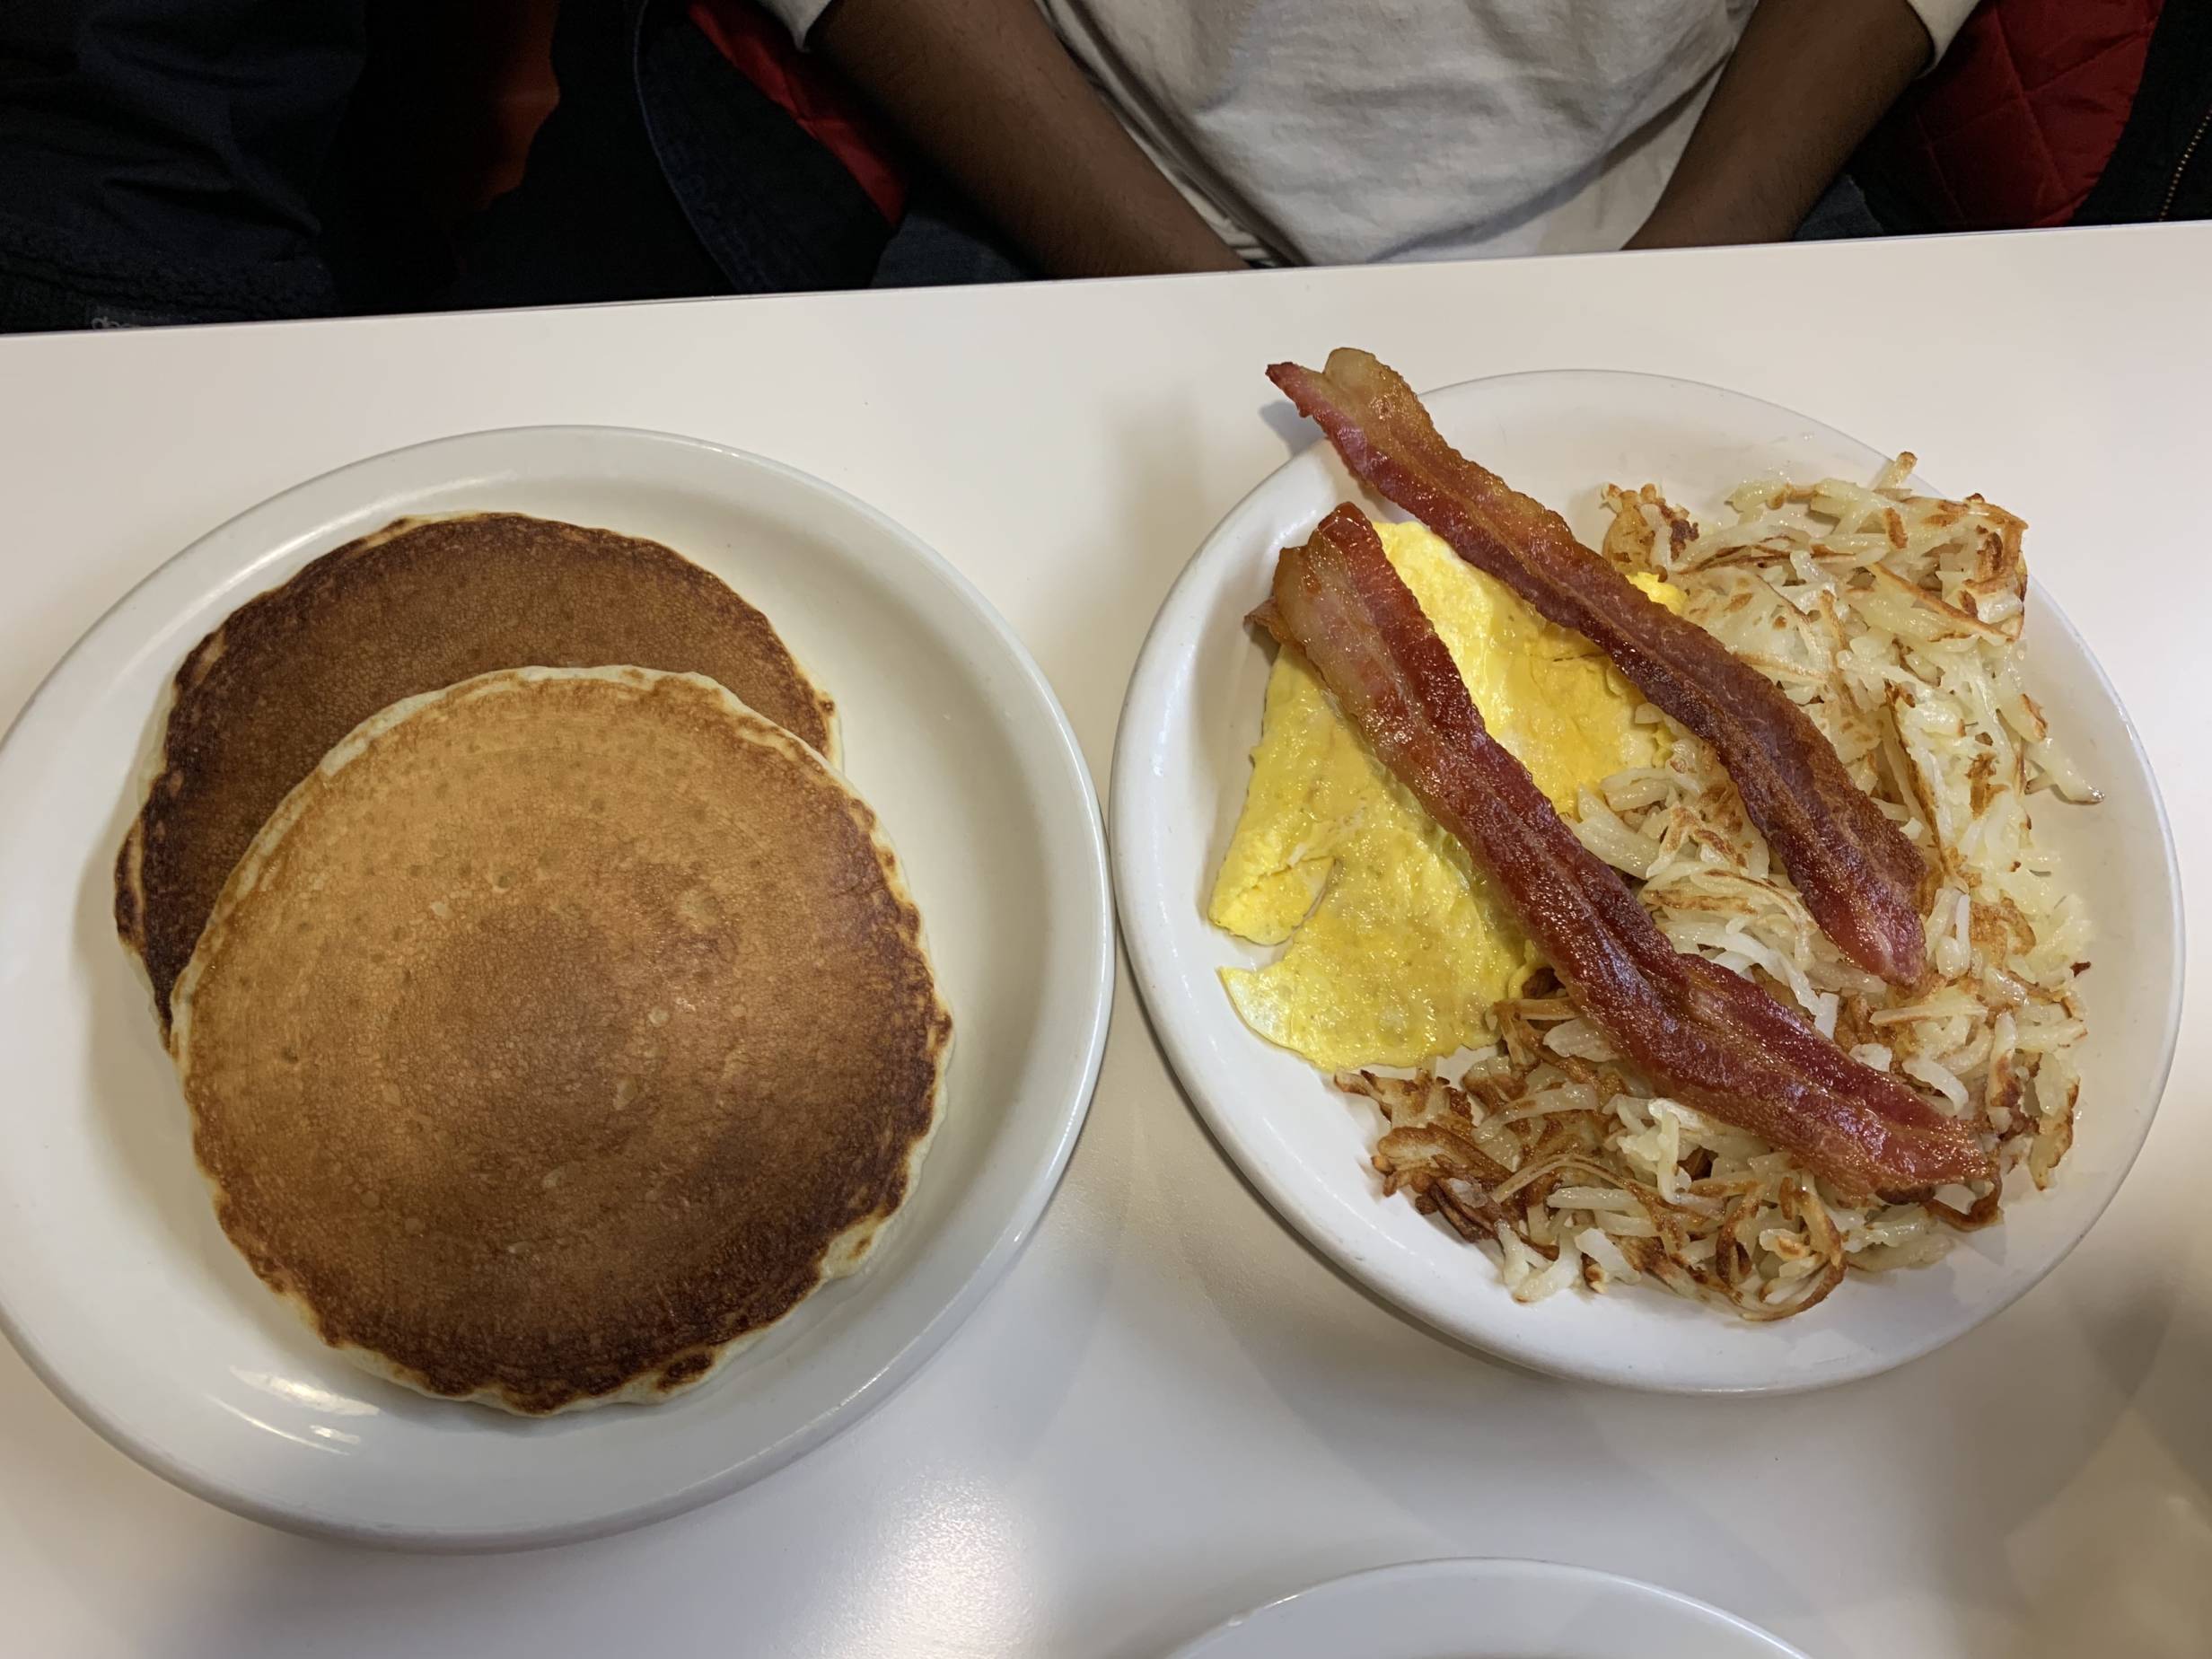 Go to Merry Ann’s for breakfast at any time of day